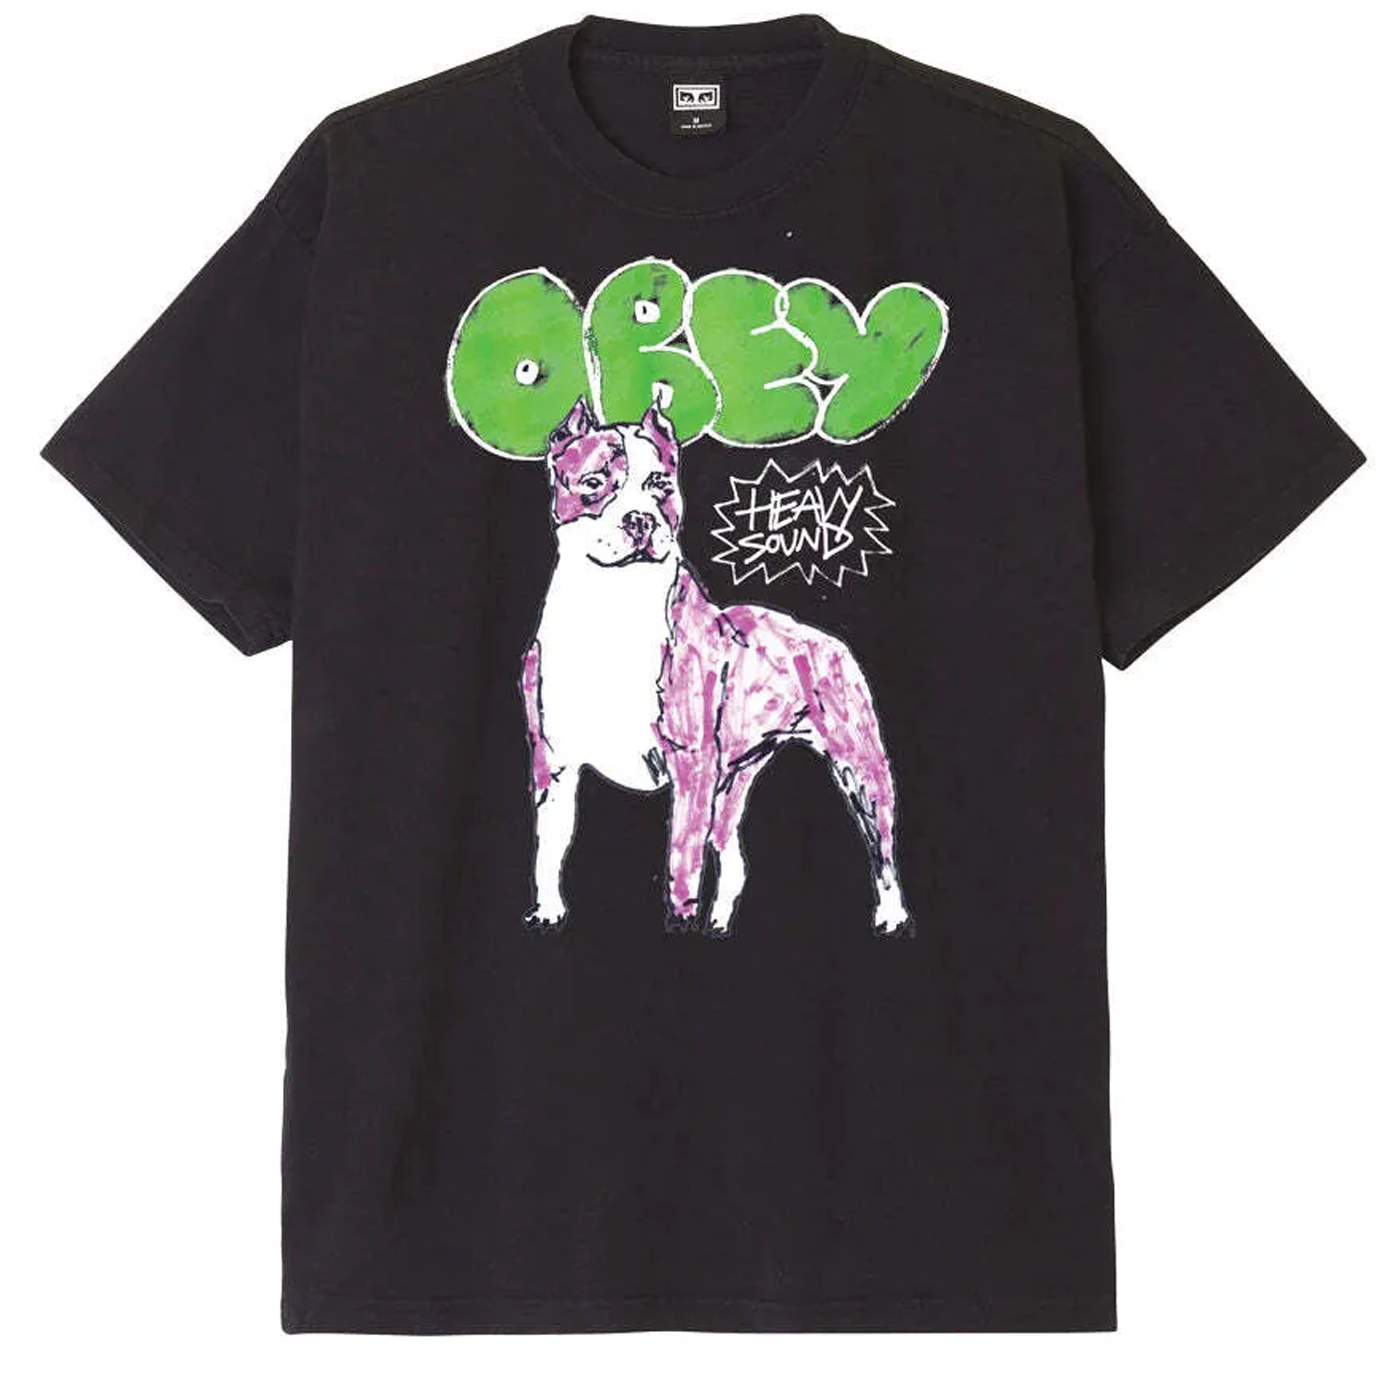 Obey Heavy Sound Heavyweight T-Shirt - Obey Clothing UK